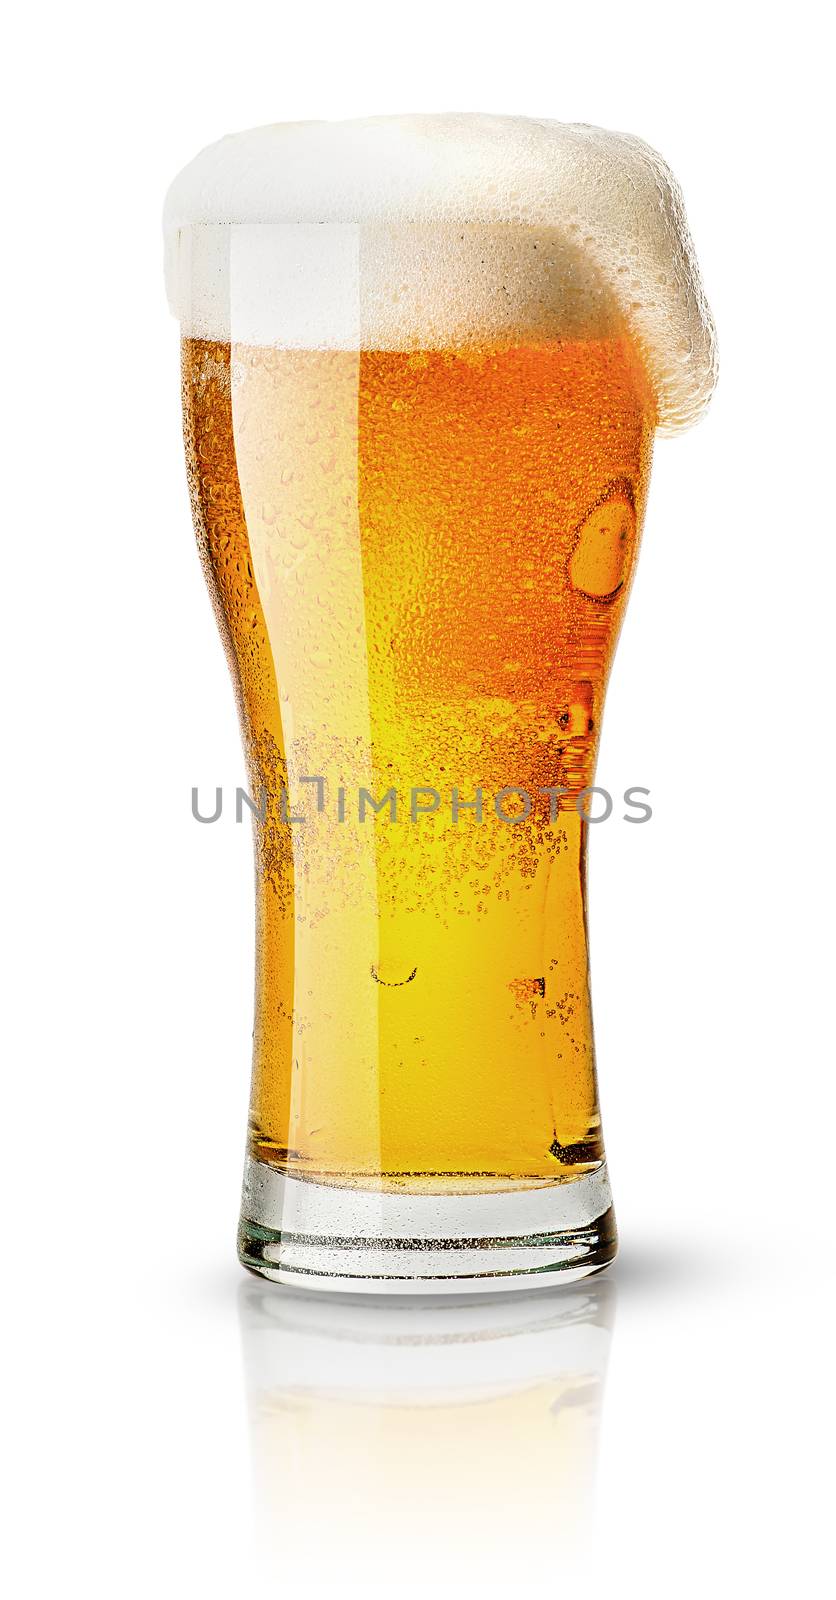 Light beer in sweaty glass and foam isolated on white background